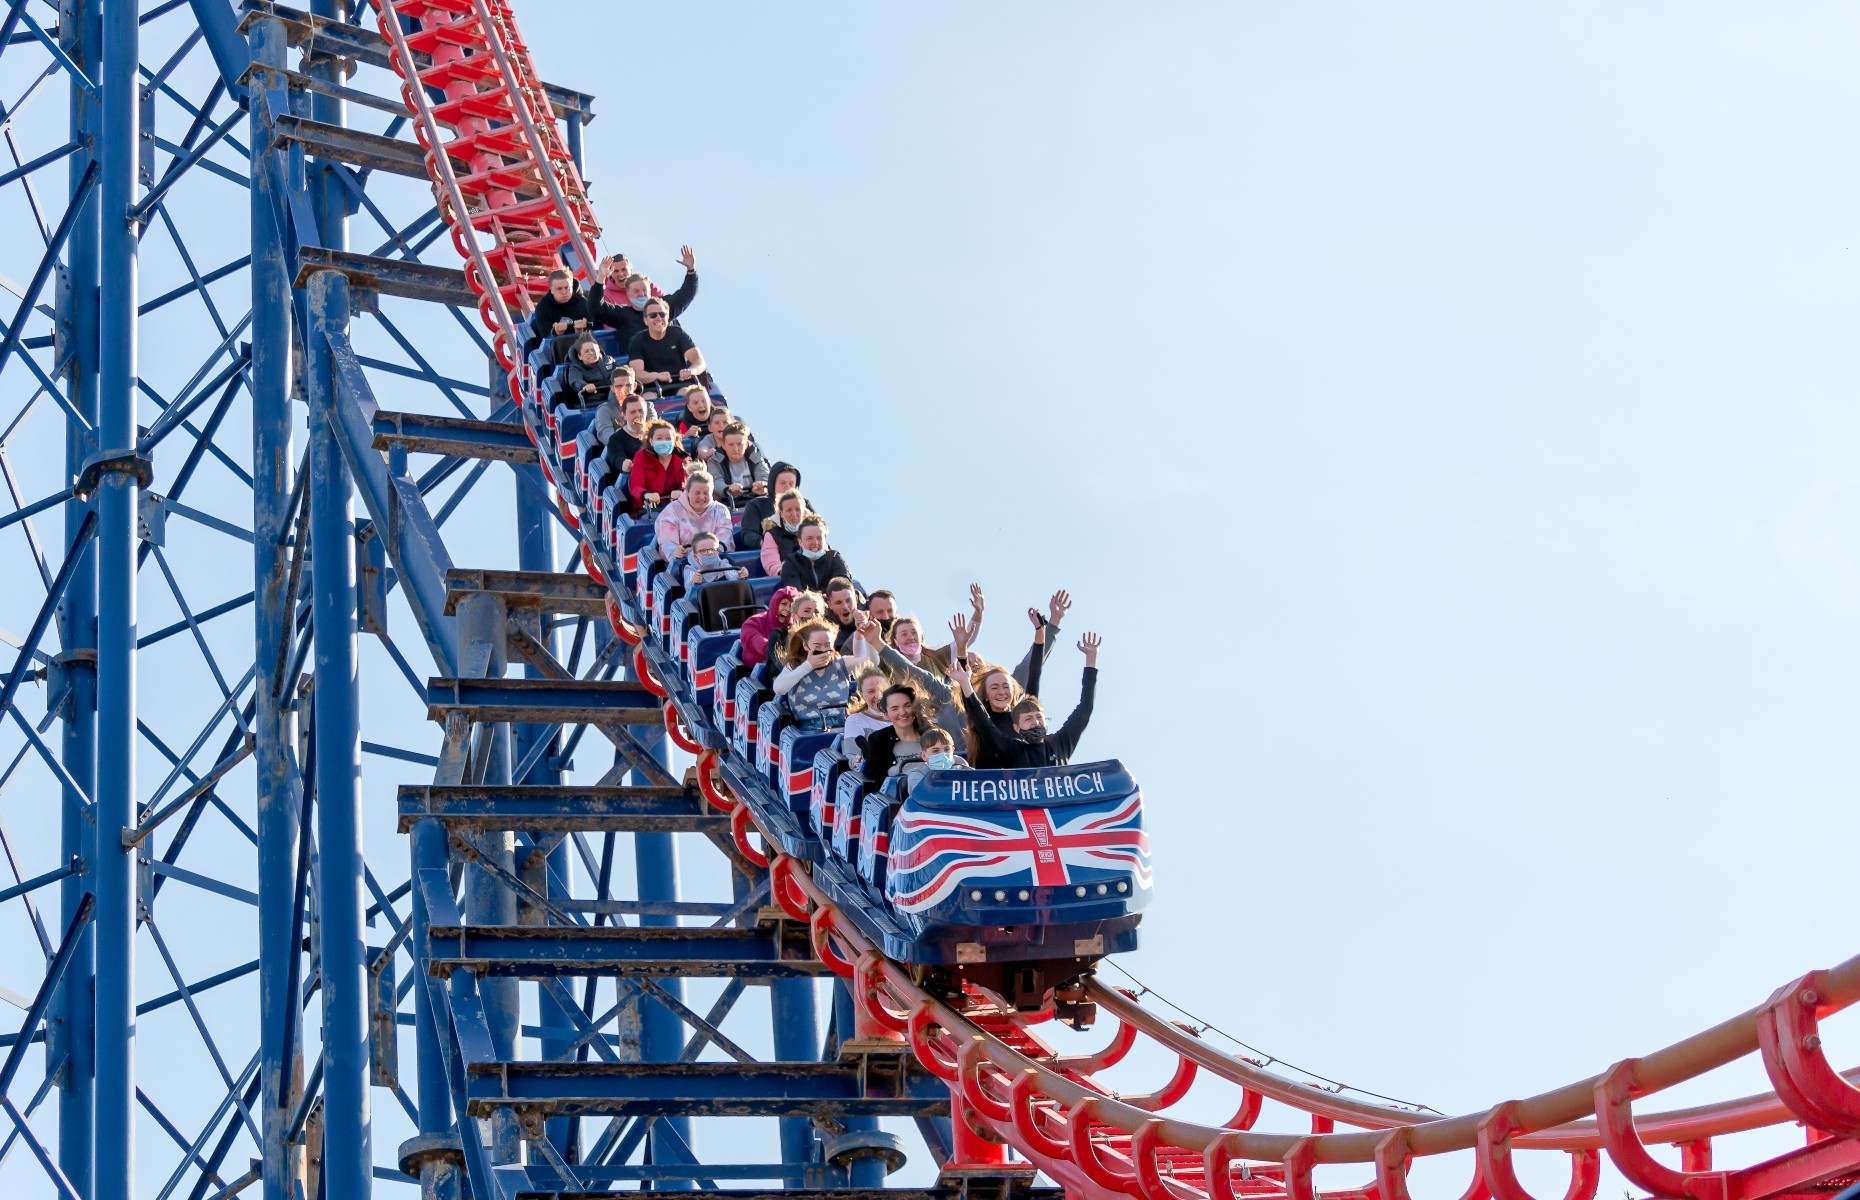 The Big One roller coaster (Image: Mark D Bailey/Shutterstock)